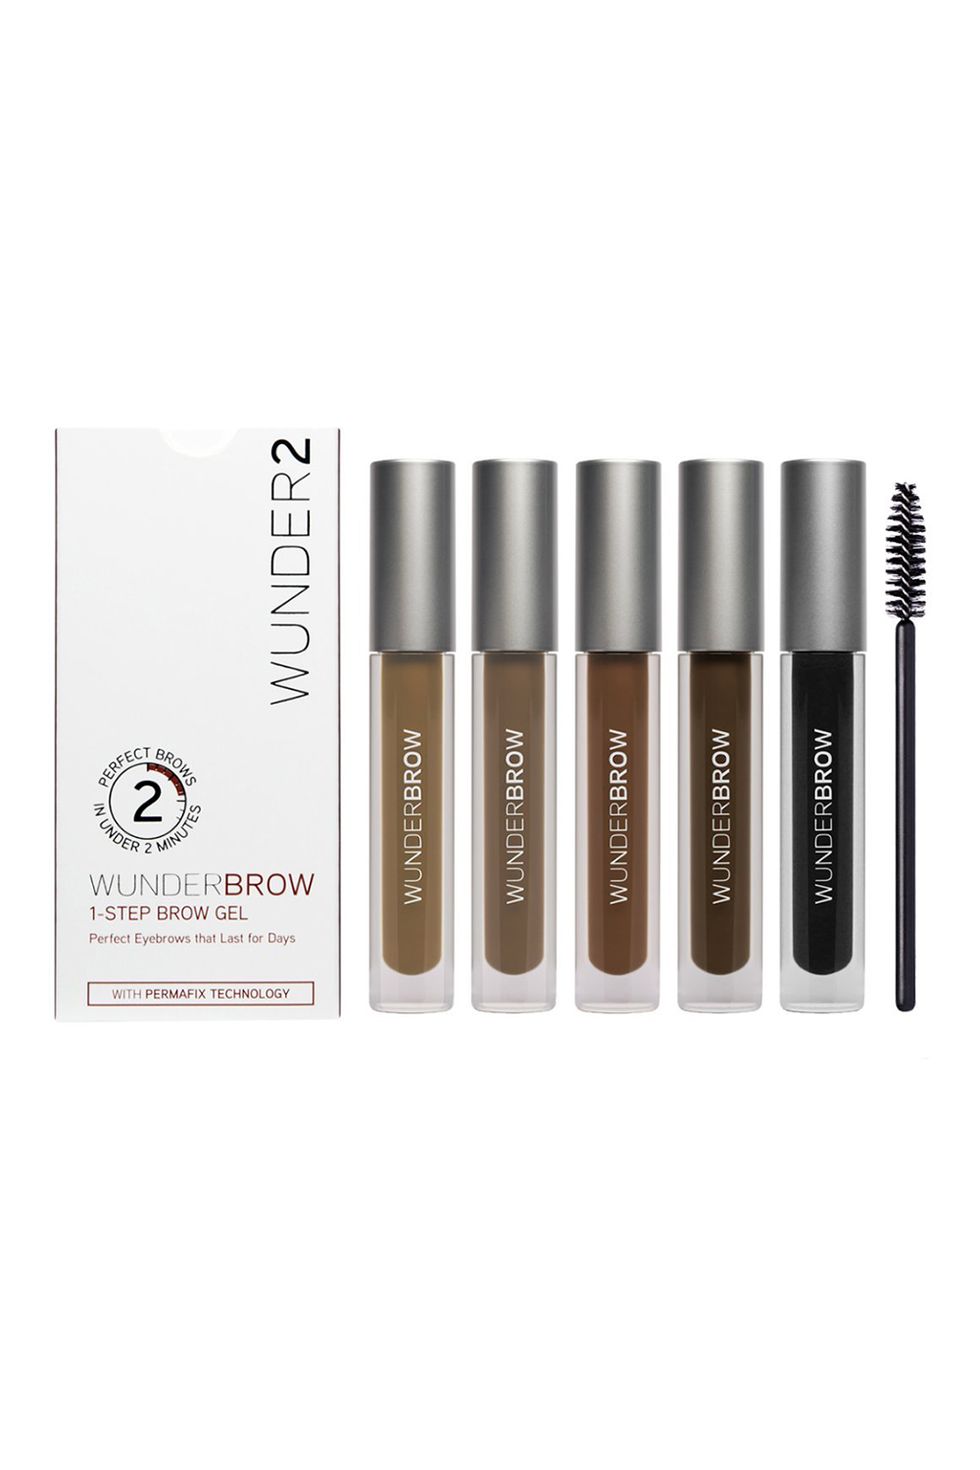 <p>Perfect for anyone with commitment issues, this brush-on eyebrow gel fades after only a few days, and each of the five formulas&nbsp;are filled with brow-plumping fibers to give you seriously thick-looking arches.</p><p><i data-redactor-tag="i">Wunder2 Wunderbrow Eyebrow Gel, $18</i></p><p><strong data-redactor-tag="strong">BUY IT: <a href="https://www.amazon.com/Wunder2-Wunderbrow-Eyebrow-Perfect-Eyebrows/dp/B00UYY2GUO">amazon.com</a>. </strong>&nbsp;</p>